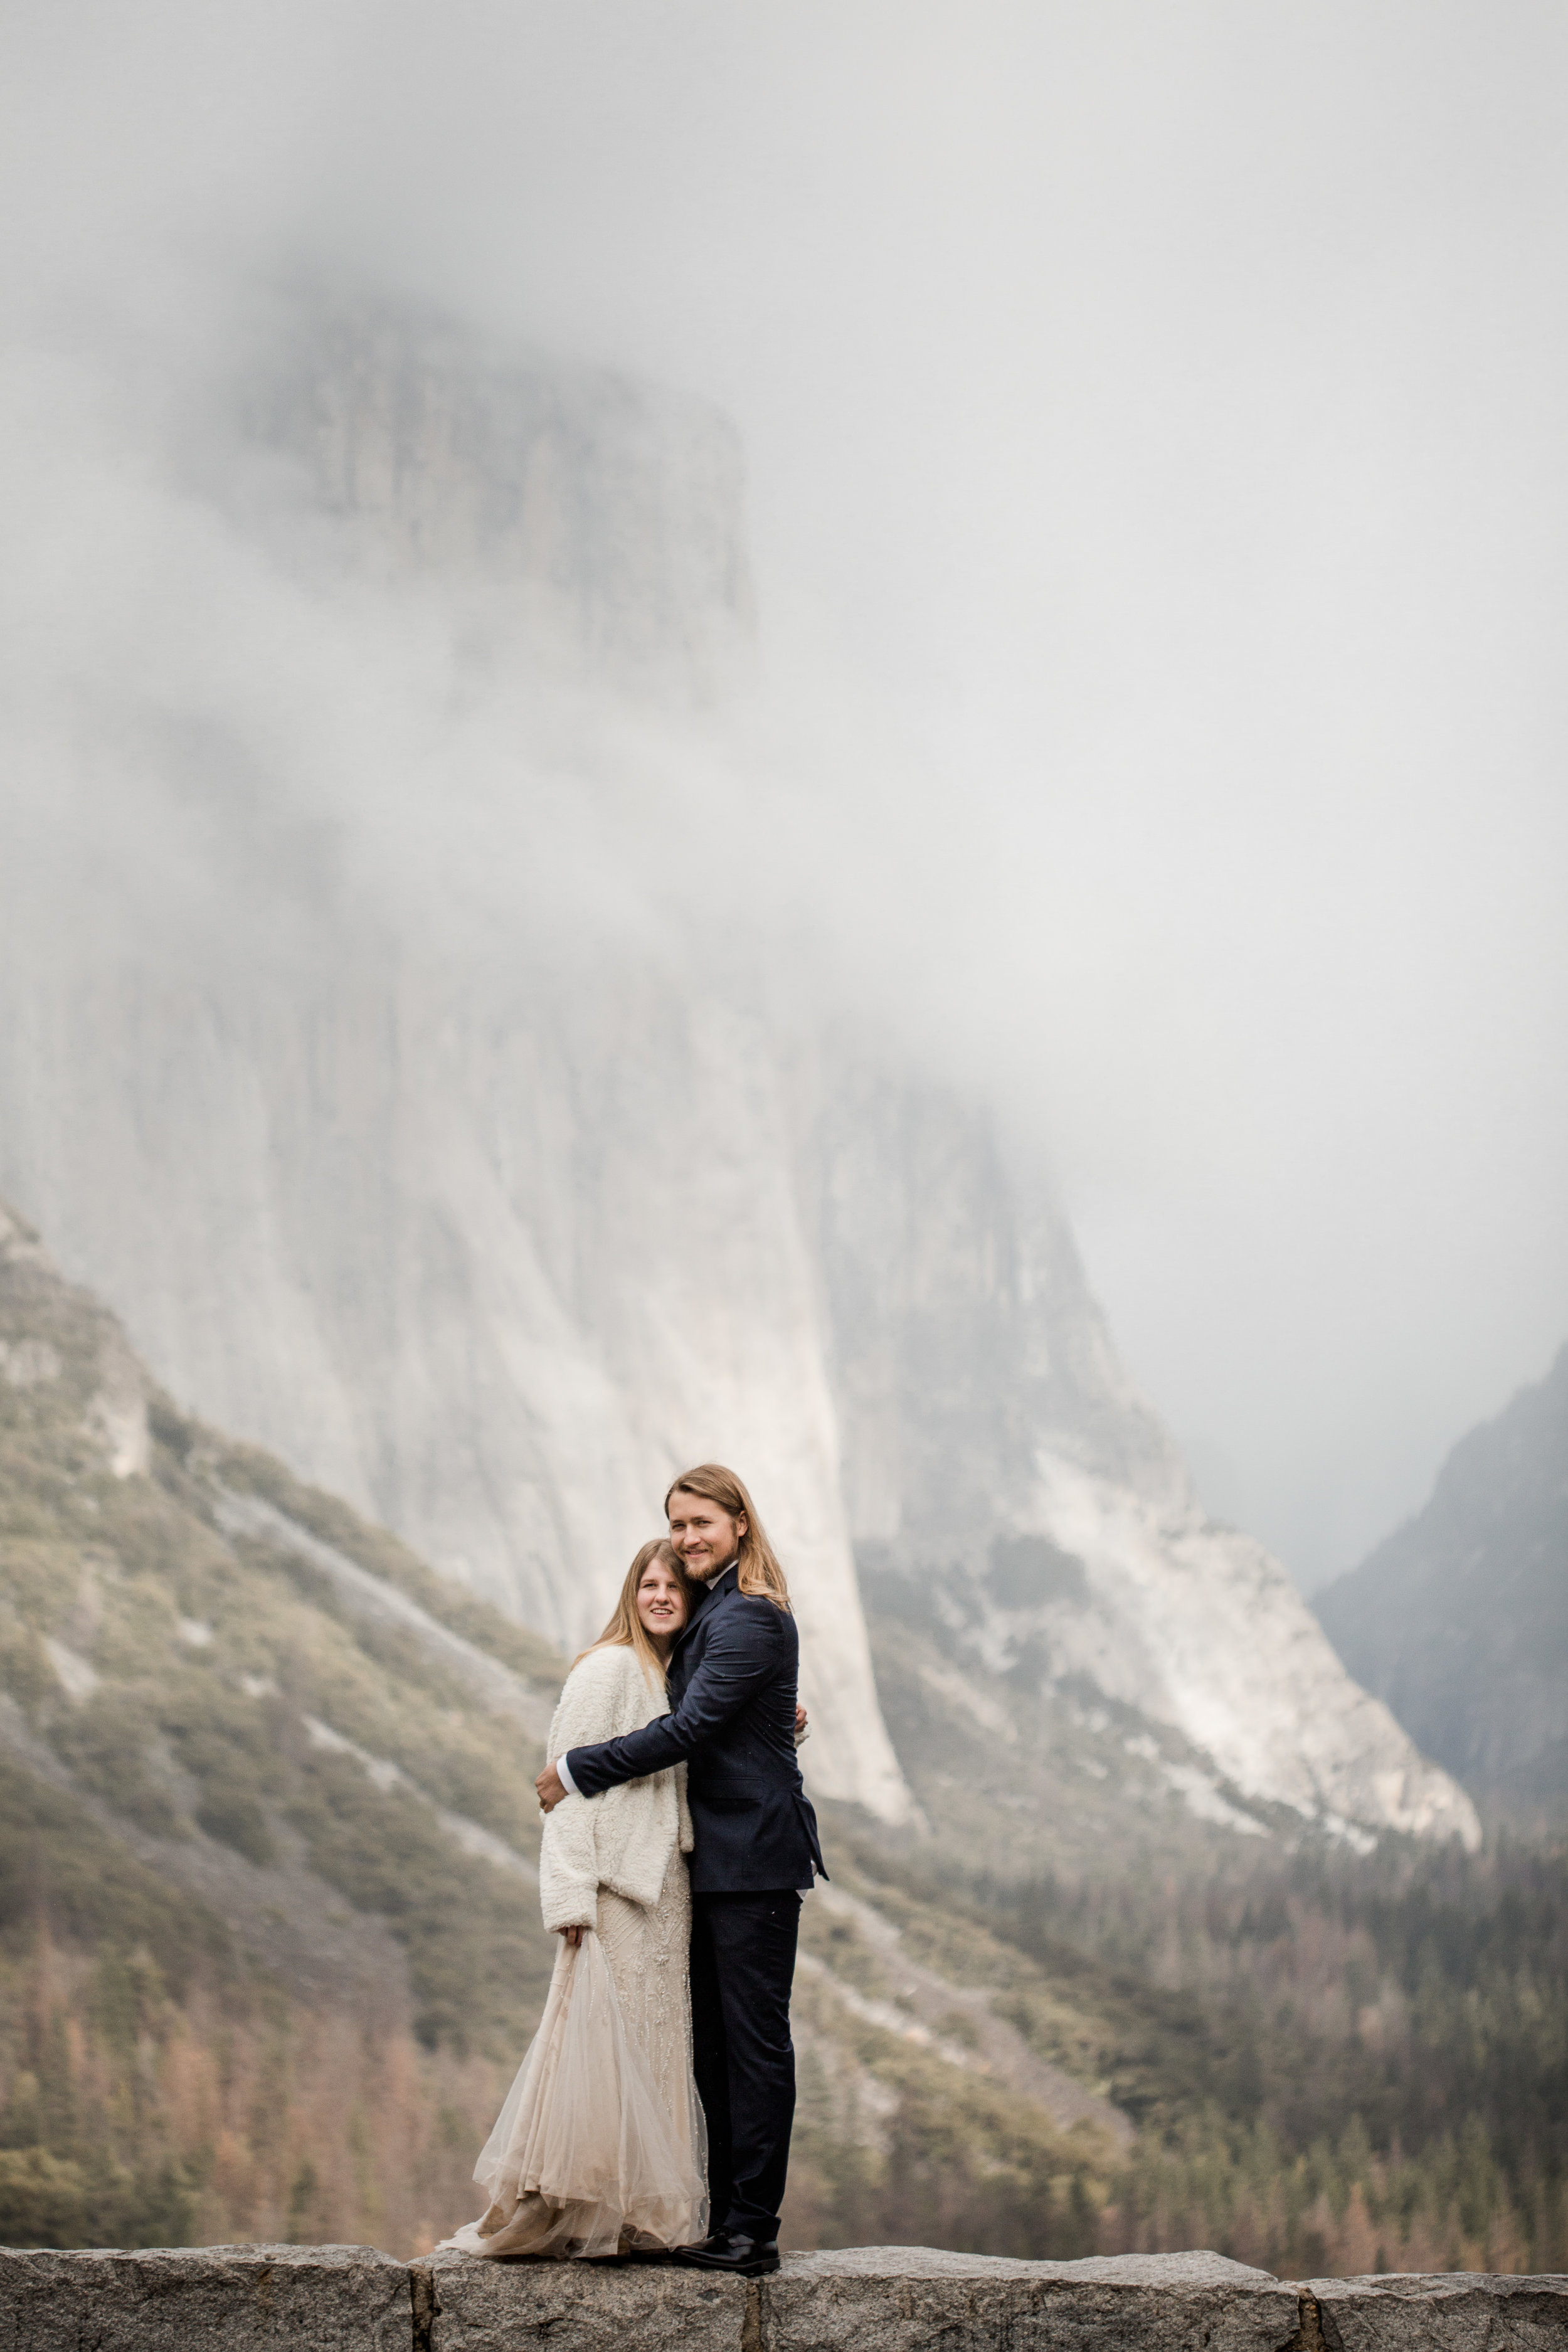 nicole-daacke-photography-yousemite-national-park-elopement-photographer-winter-cloud-moody-elope-inspiration-yosemite-valley-tunnel-view-winter-cloud-fog-weather-wedding-photos-4.jpg